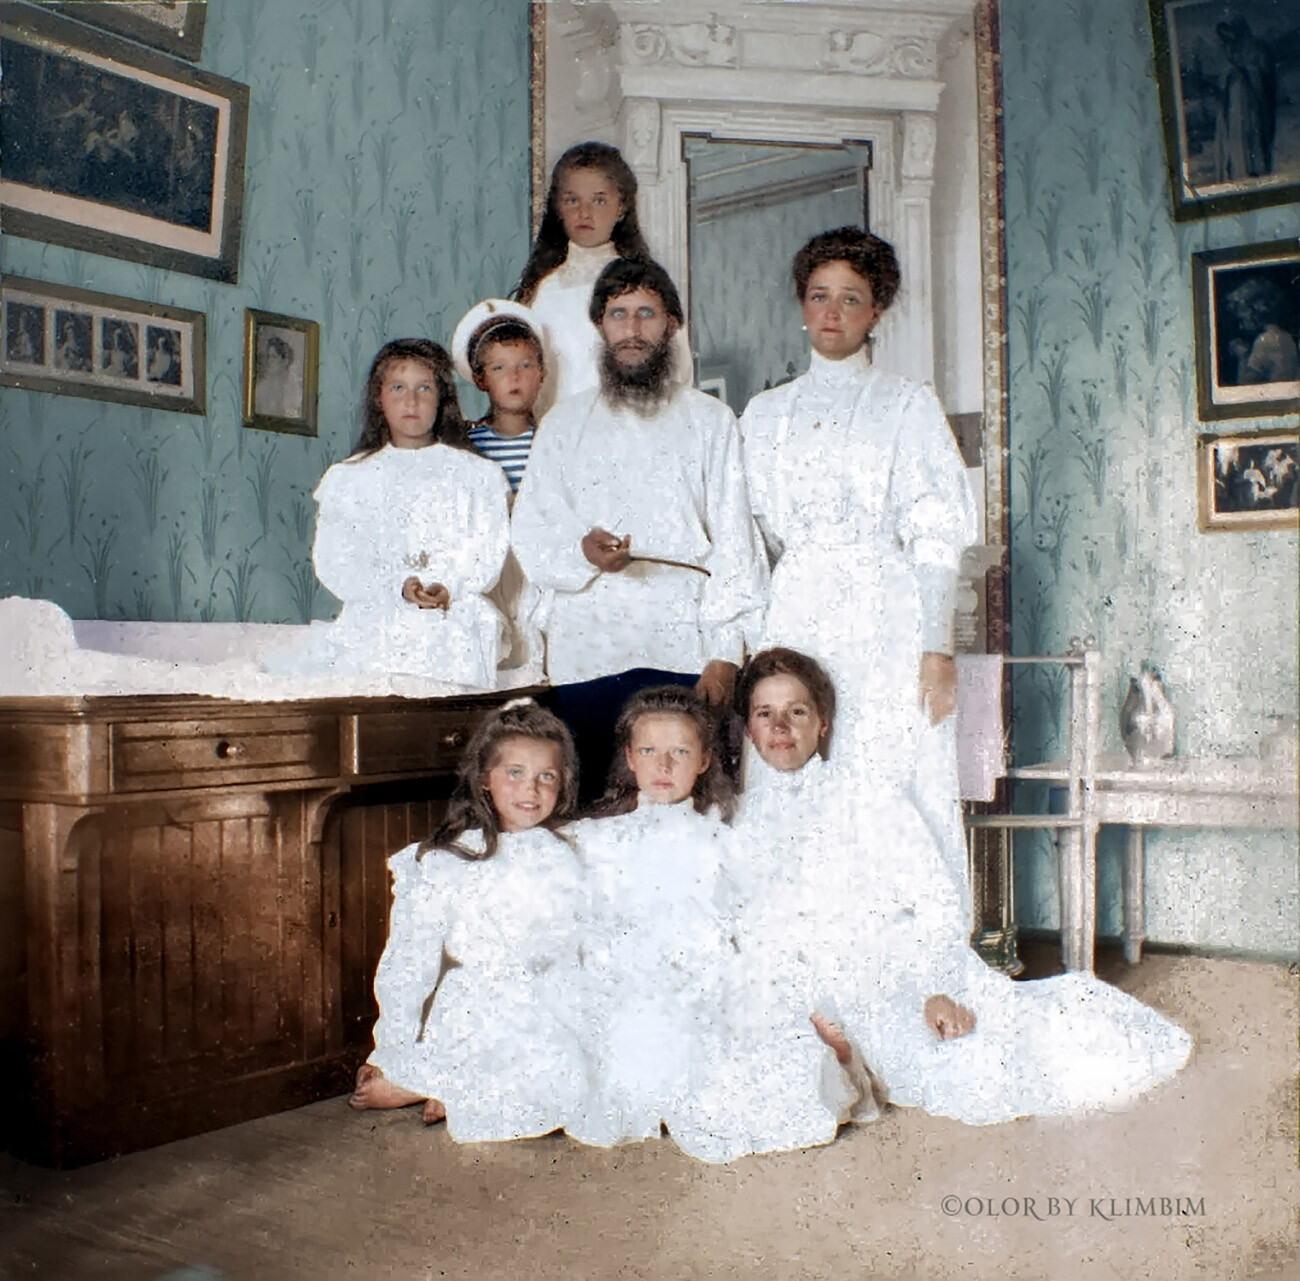 Rasputin with the empress, the imperial children and a governess. Tsarskoye Selo, 1908.

